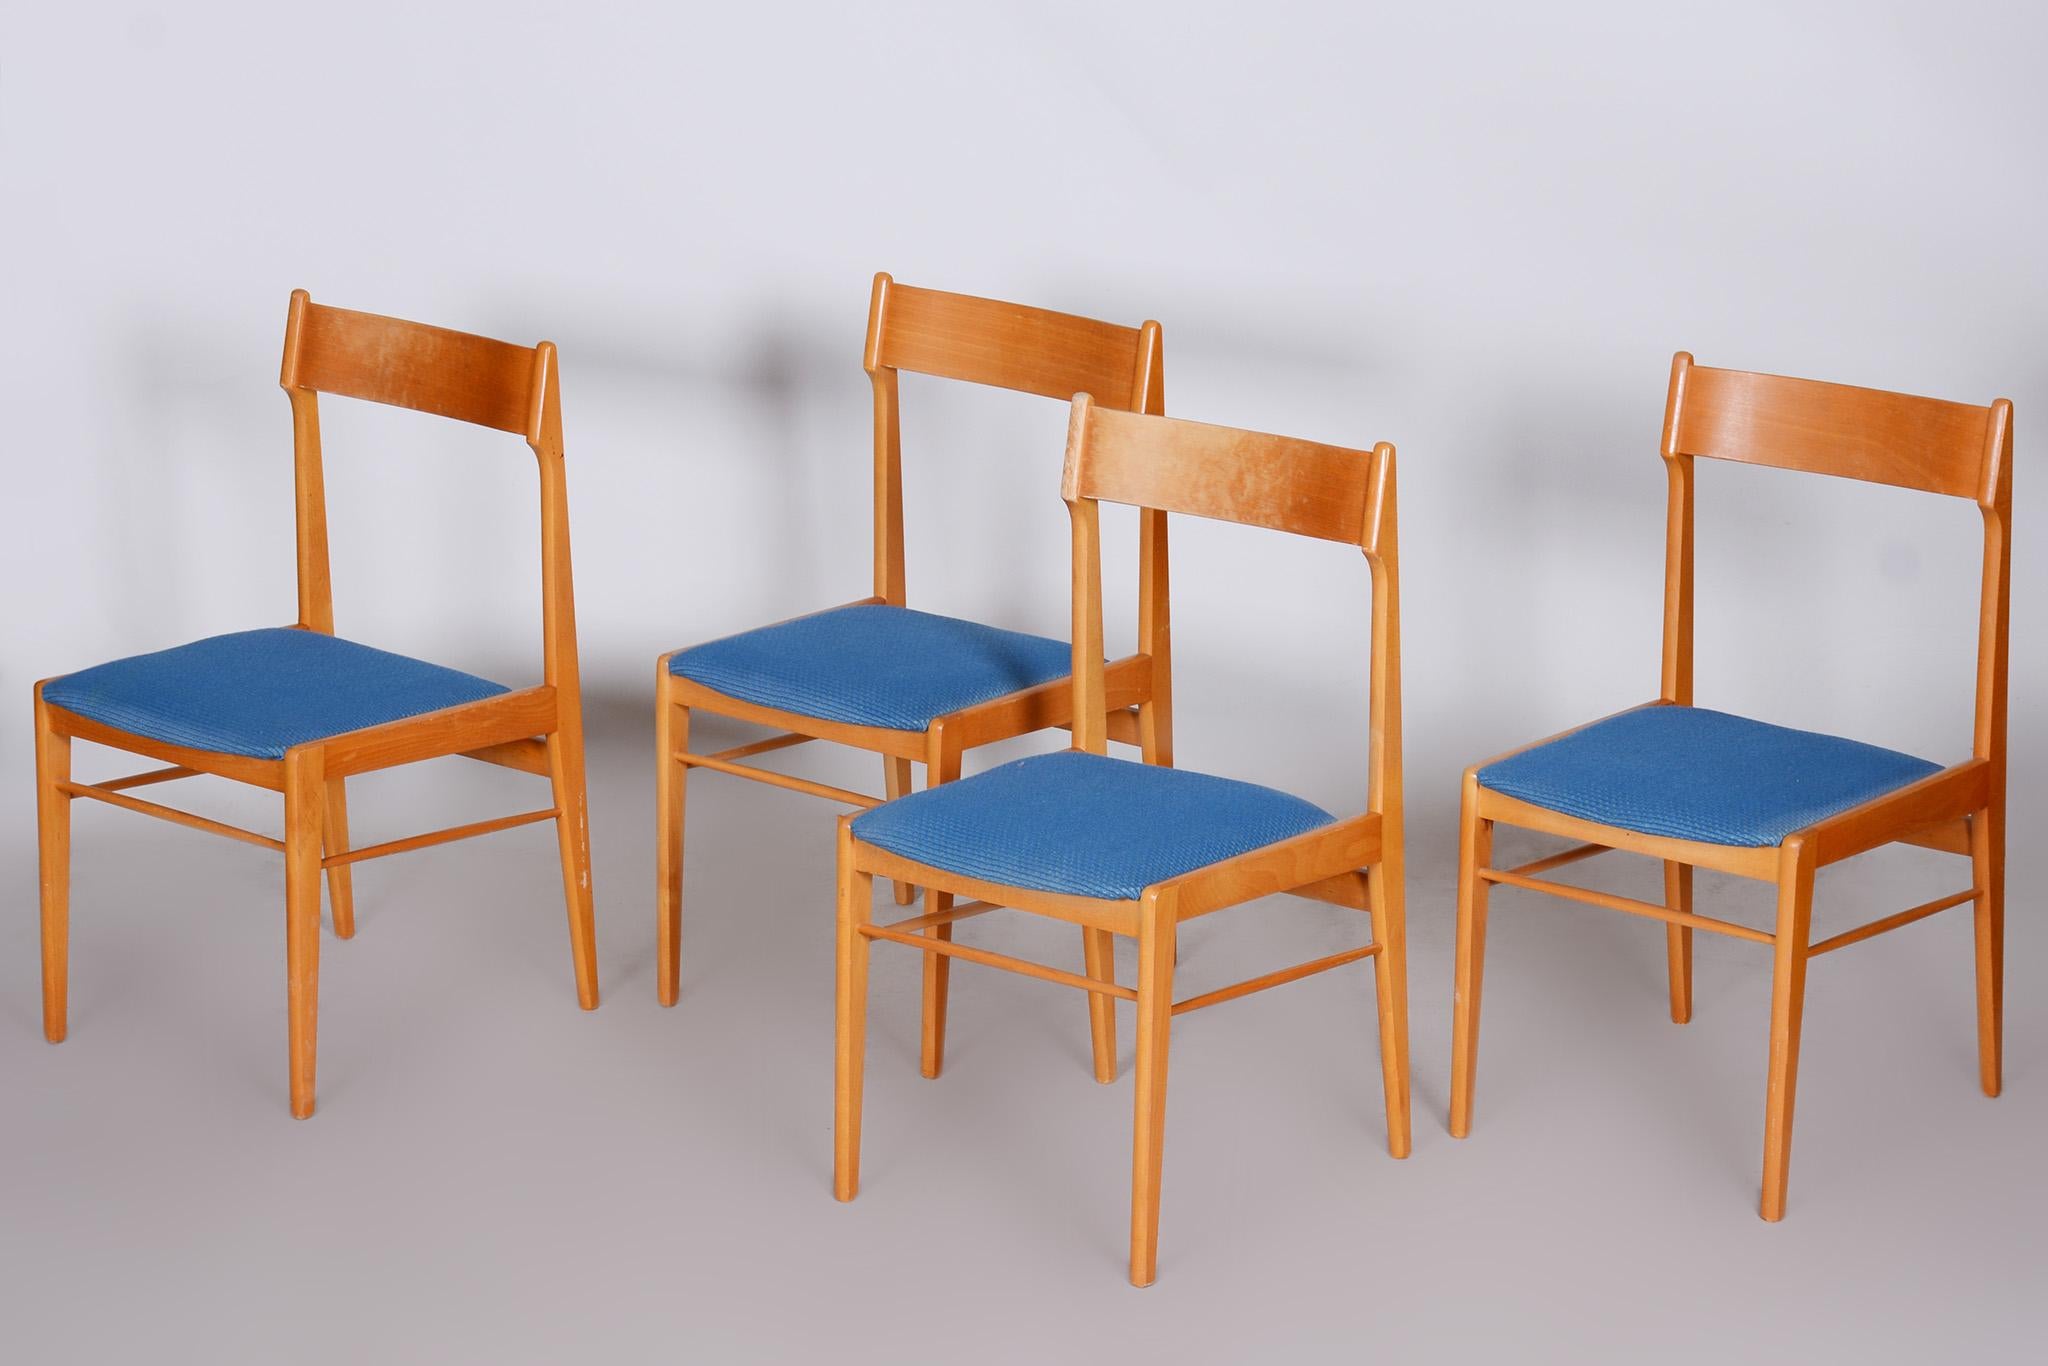 Blue and Brown Dining Chairs 4 Pcs, Well Preserved Original Condition, 1950s In Good Condition For Sale In Horomerice, CZ